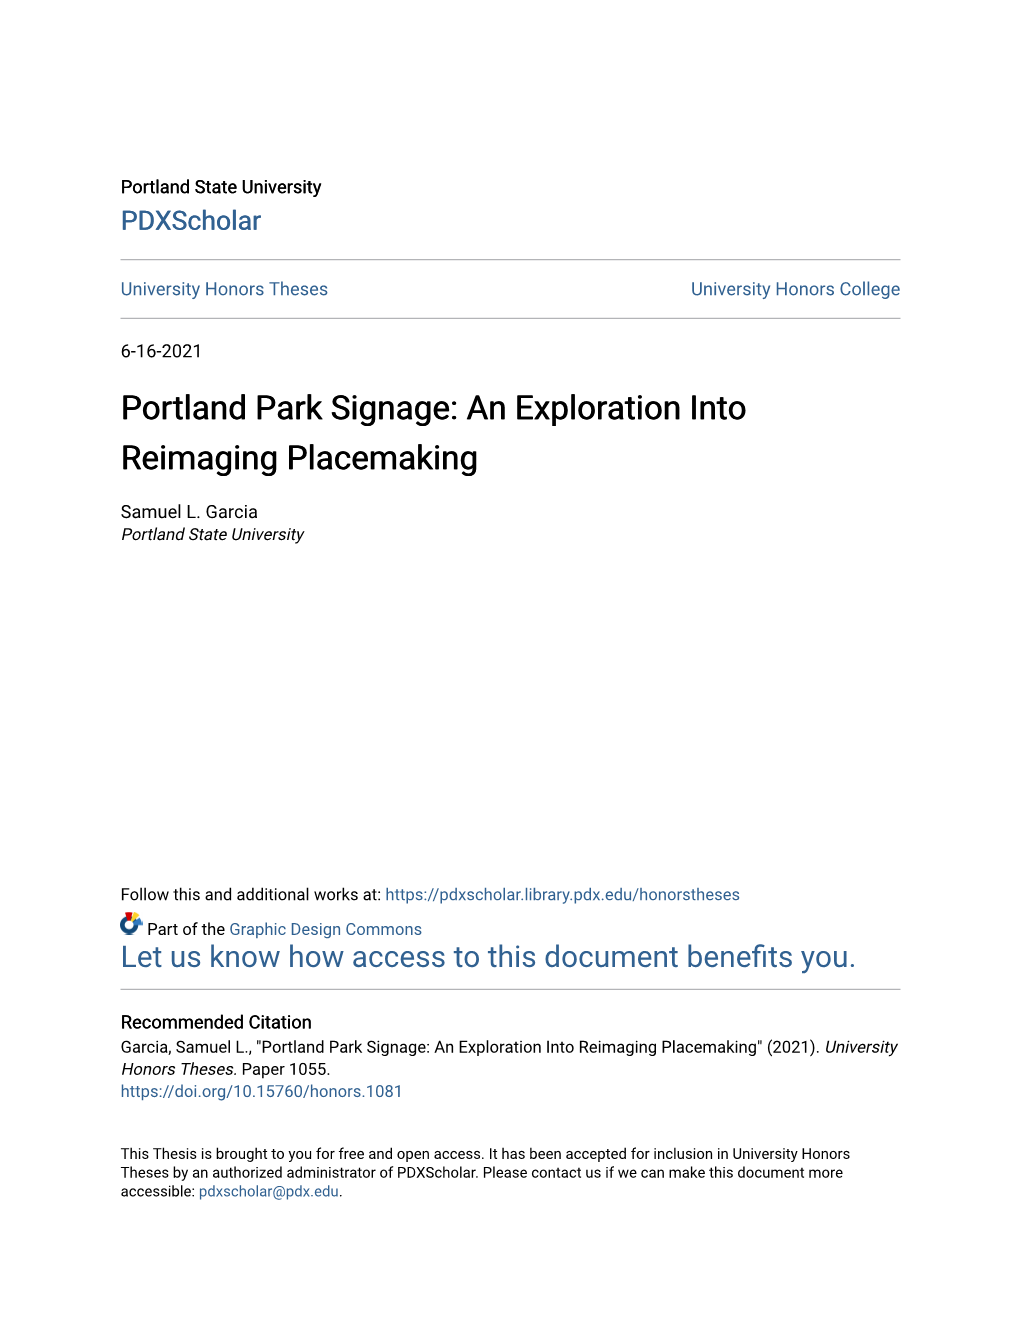 Portland Park Signage: an Exploration Into Reimaging Placemaking